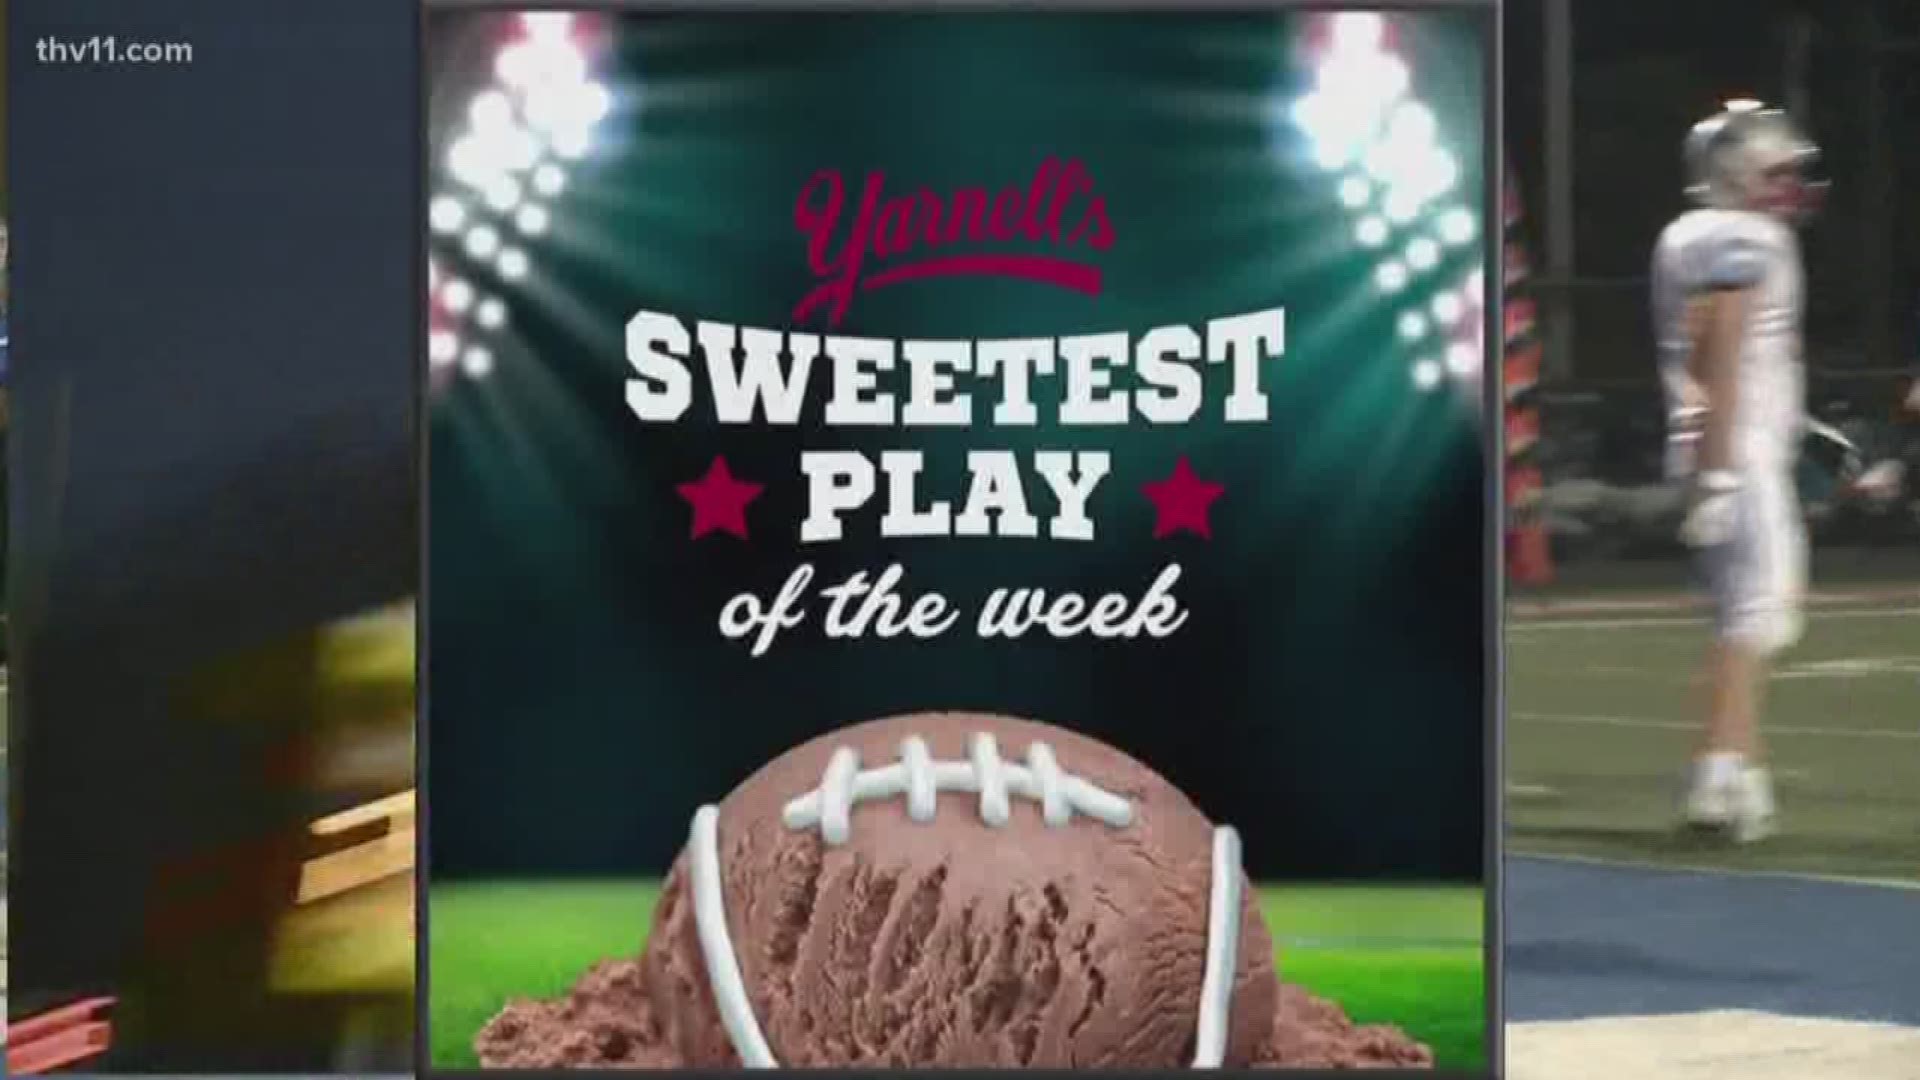 Vote for Yarnell's Sweetest Play for week one!